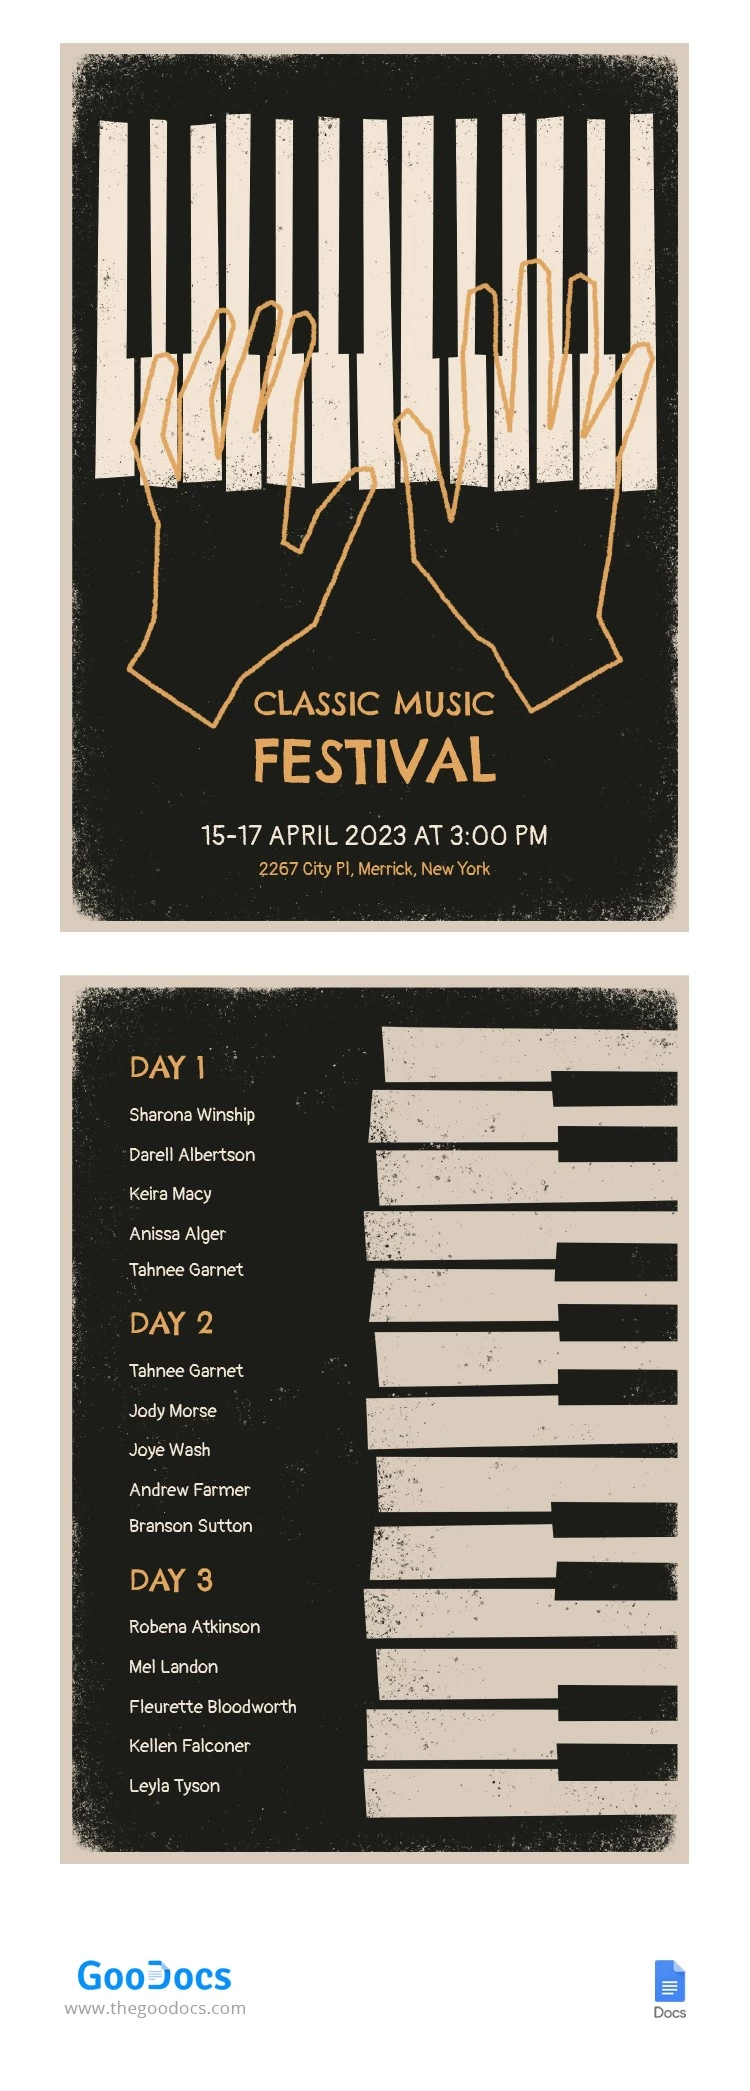 Classic Music Festival Poster - free Google Docs Template - 10063821